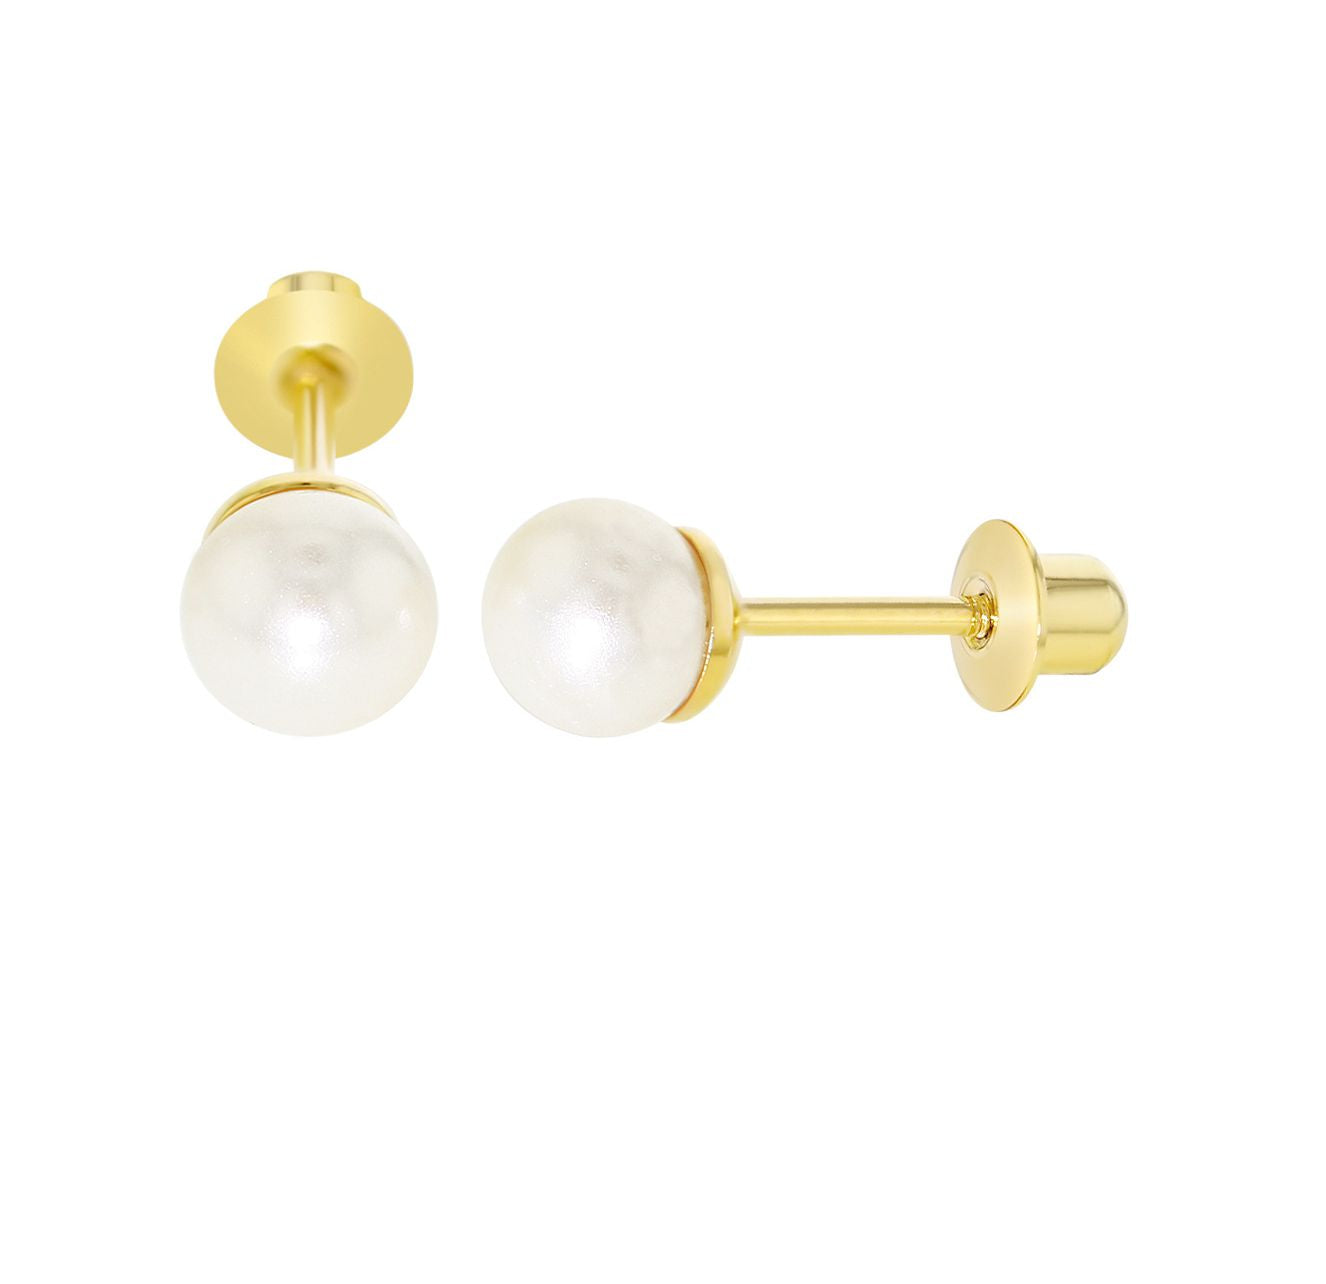 Children's, Teens' and Mothers' Earrings:  18k Gold Filled 5mm White Simulated Pearl Screw Back Earrings